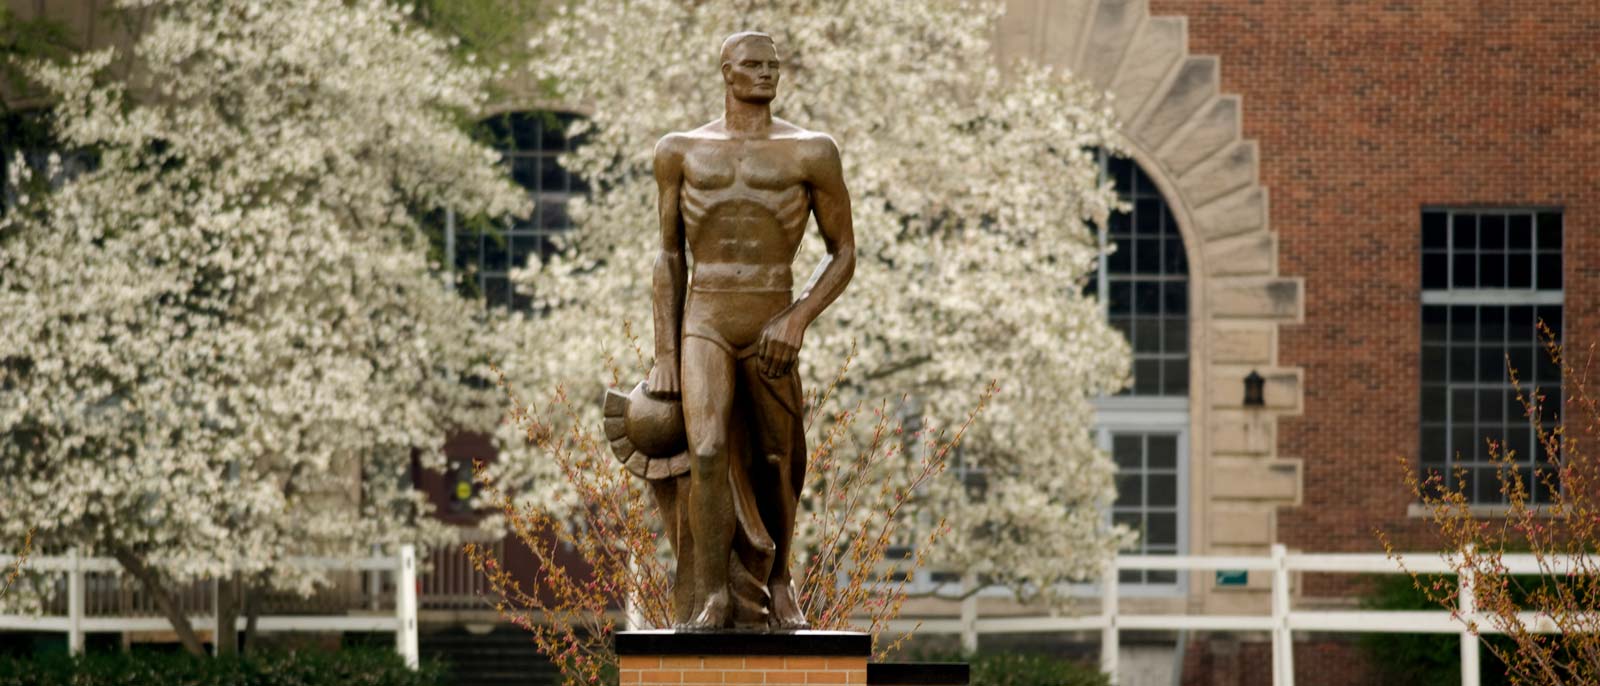 Spartan Statue on a spring day with trees blooming in the background